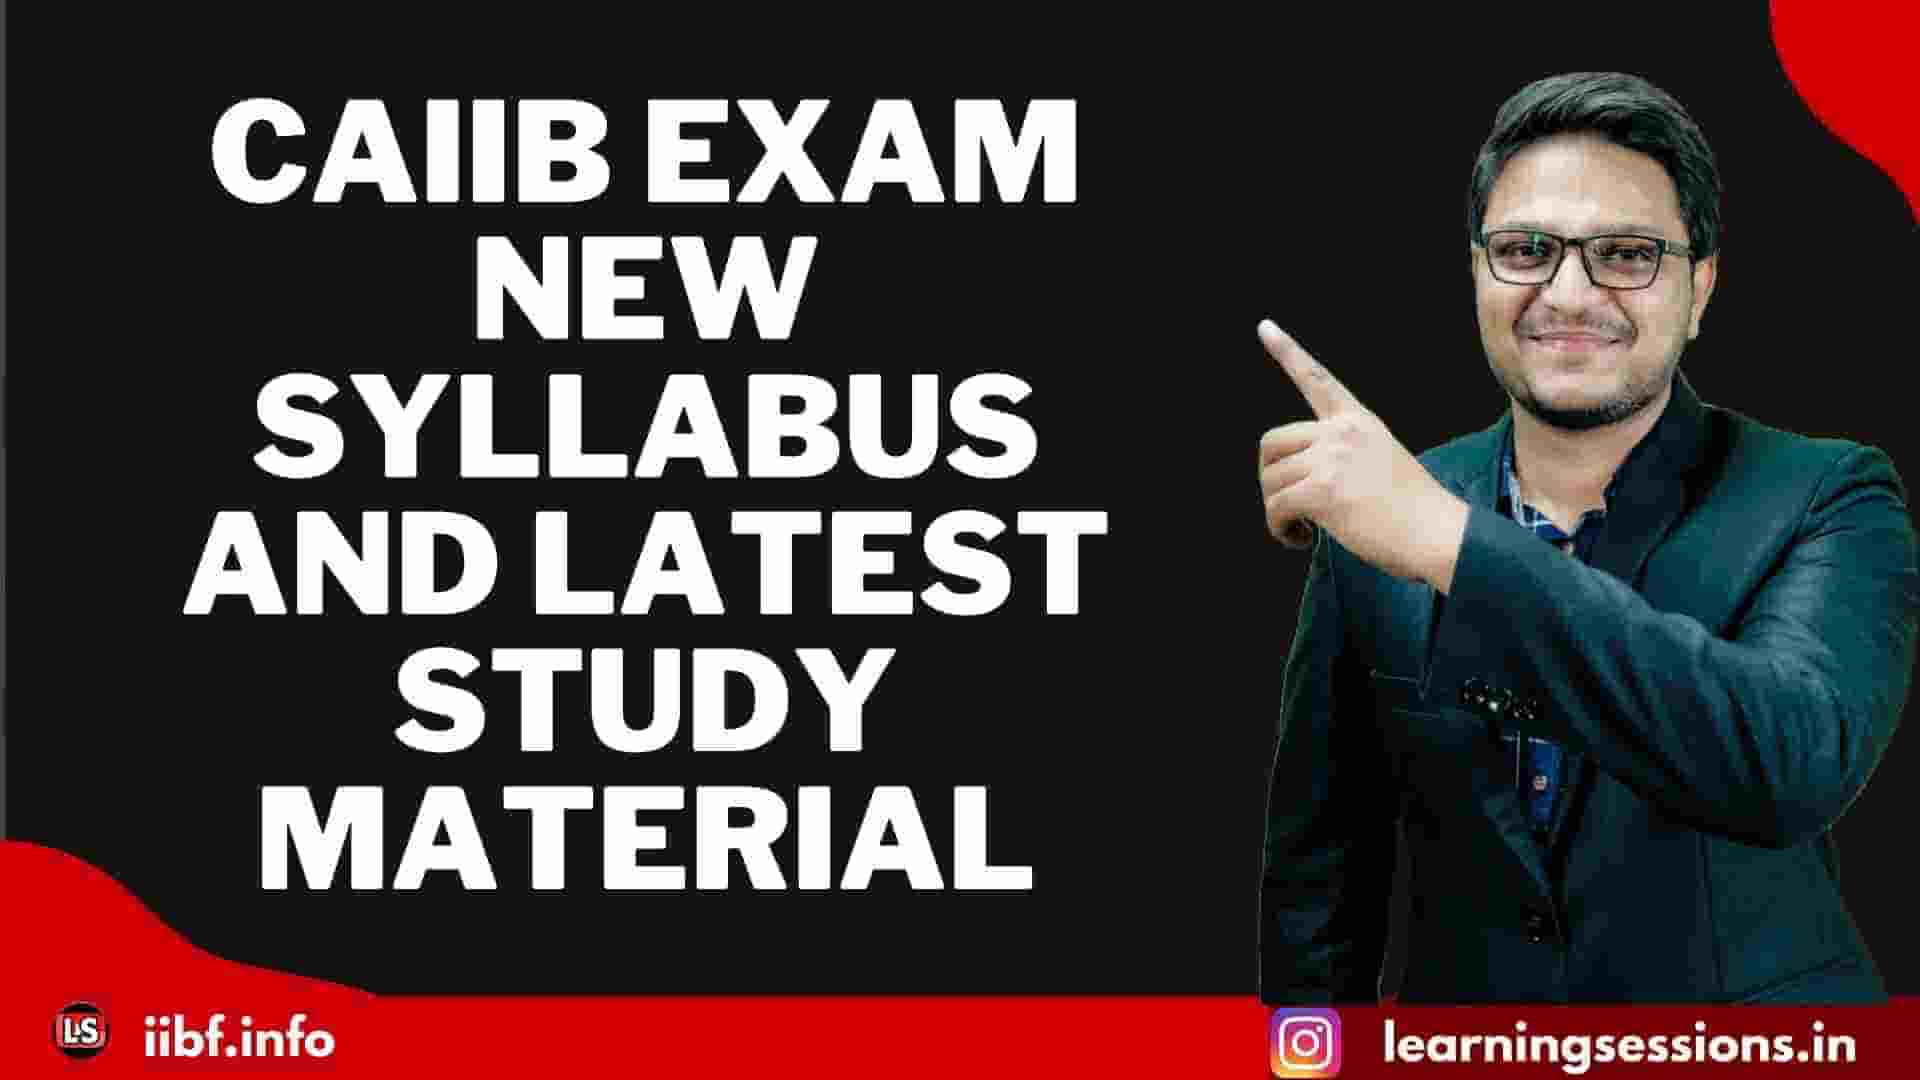 CAIIB EXAM NEW SYLLABUS AND LATEST STUDY MATERIAL 2022